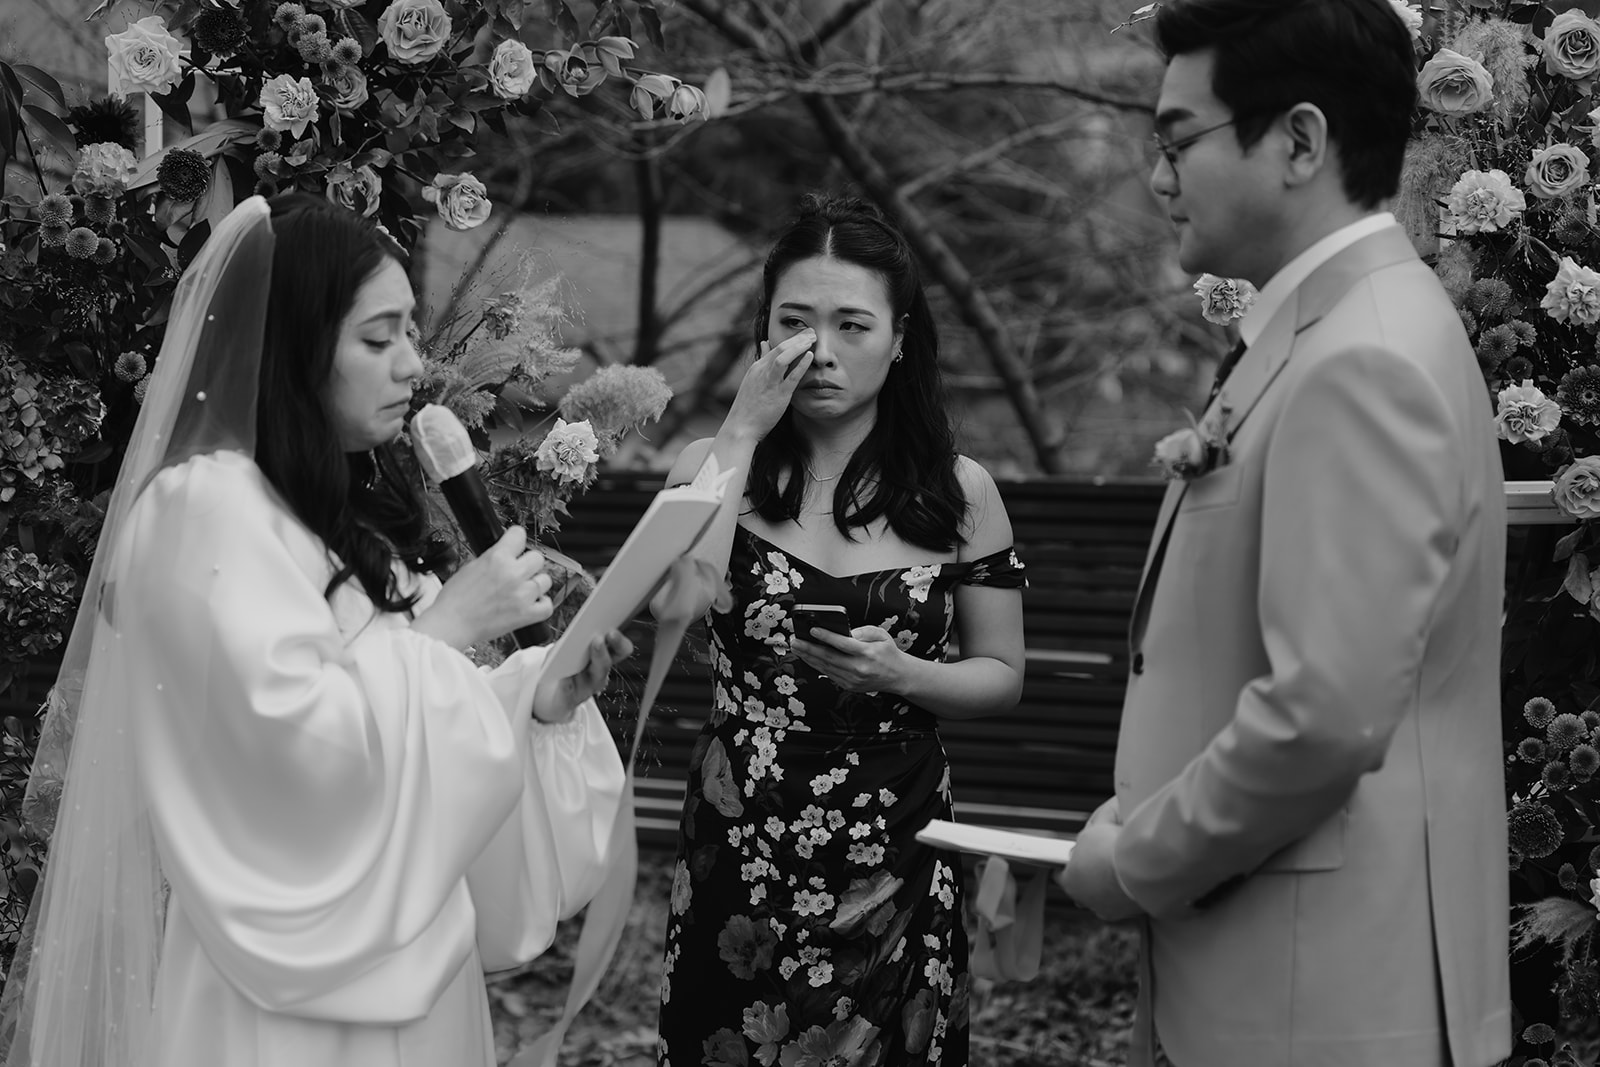 A bride in a white dress reads vows from a tablet at an outdoor ceremony, standing beside the groom in a suit.